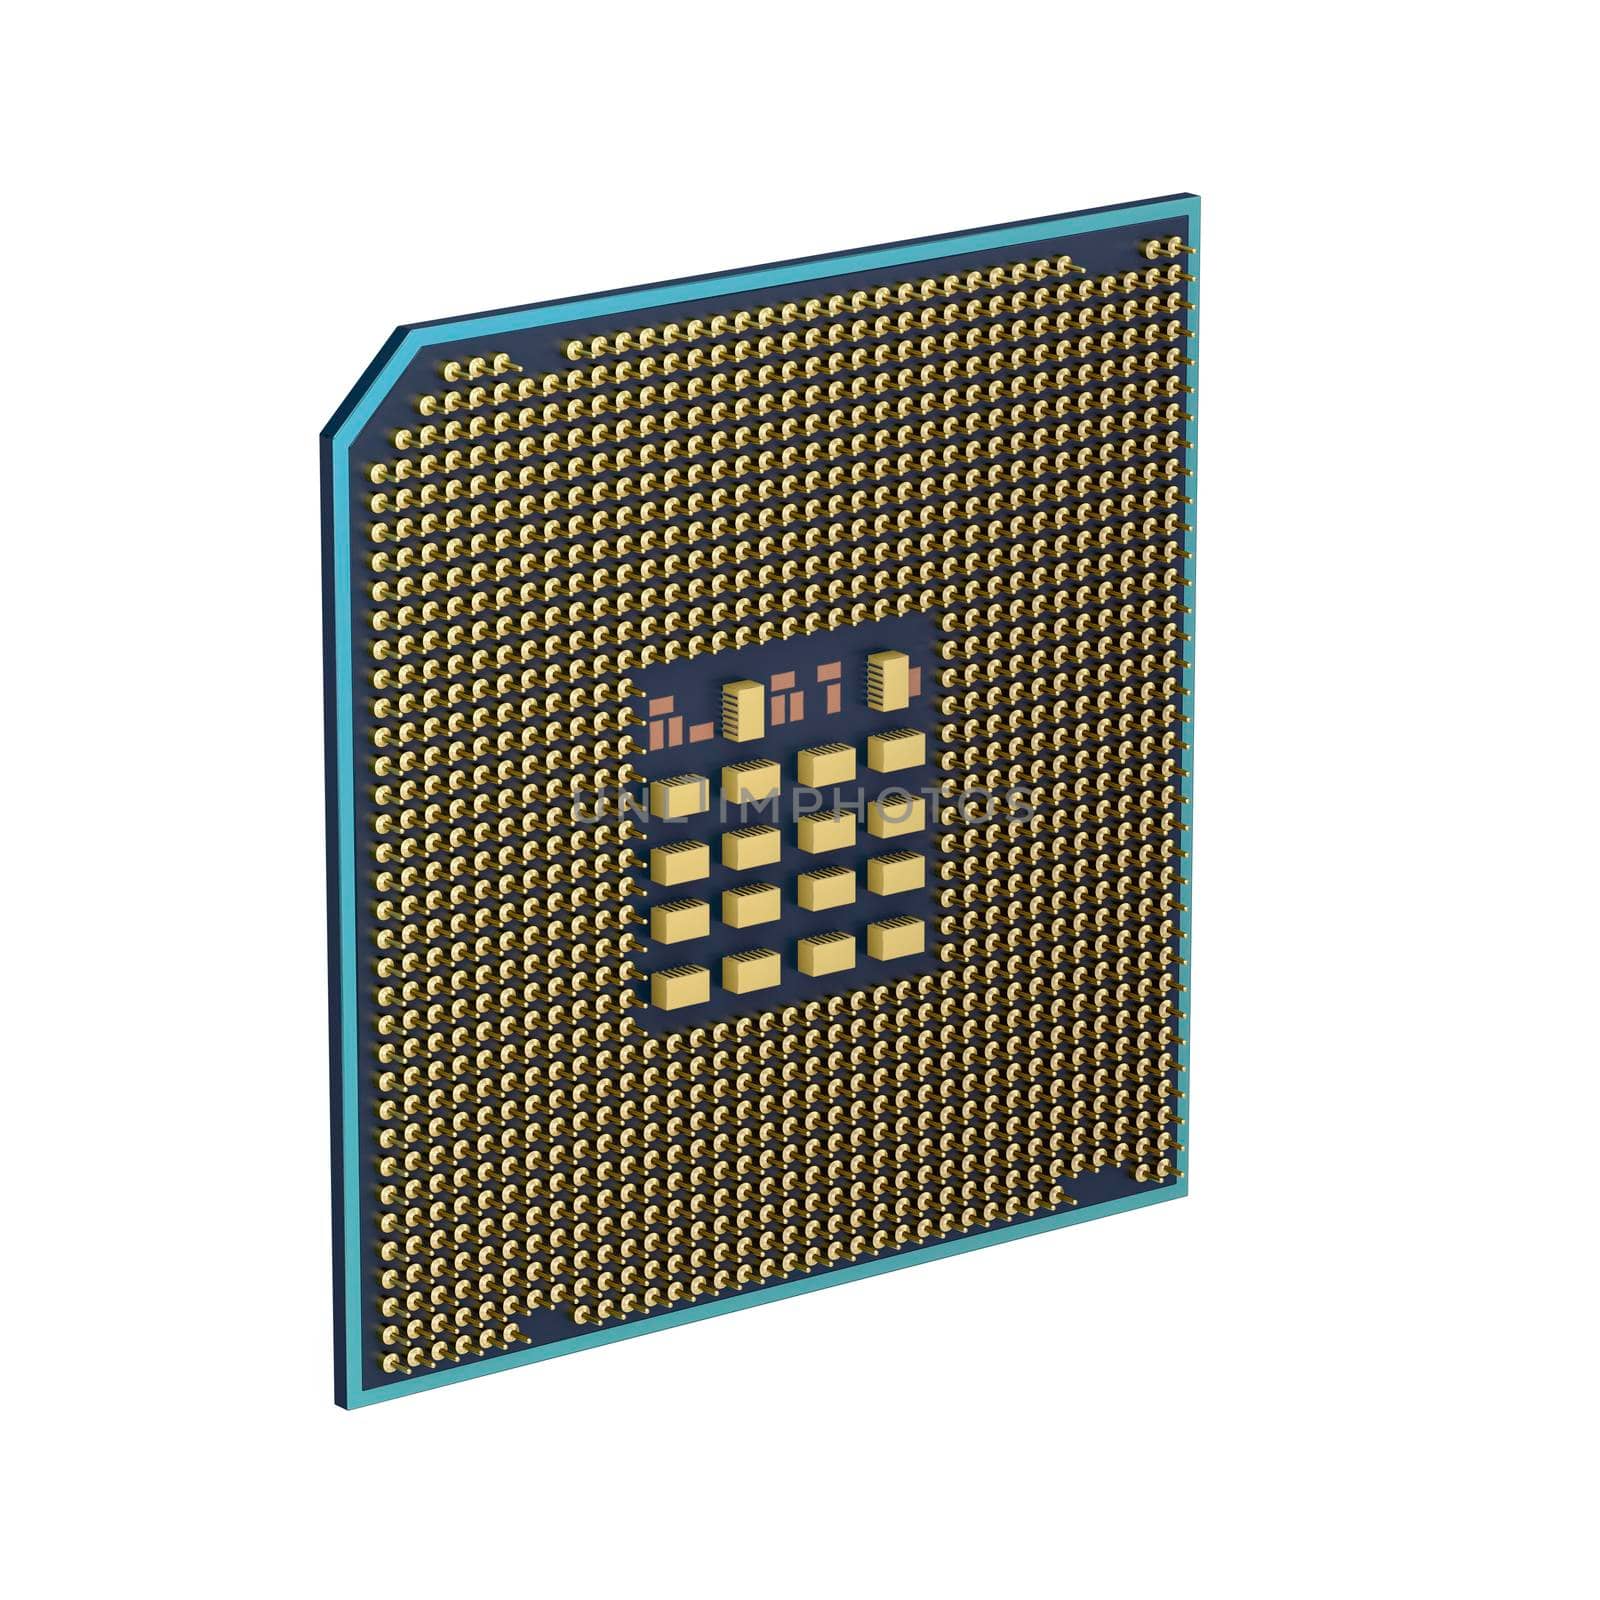 3D model of computer processor with visible wire-frame by magraphics